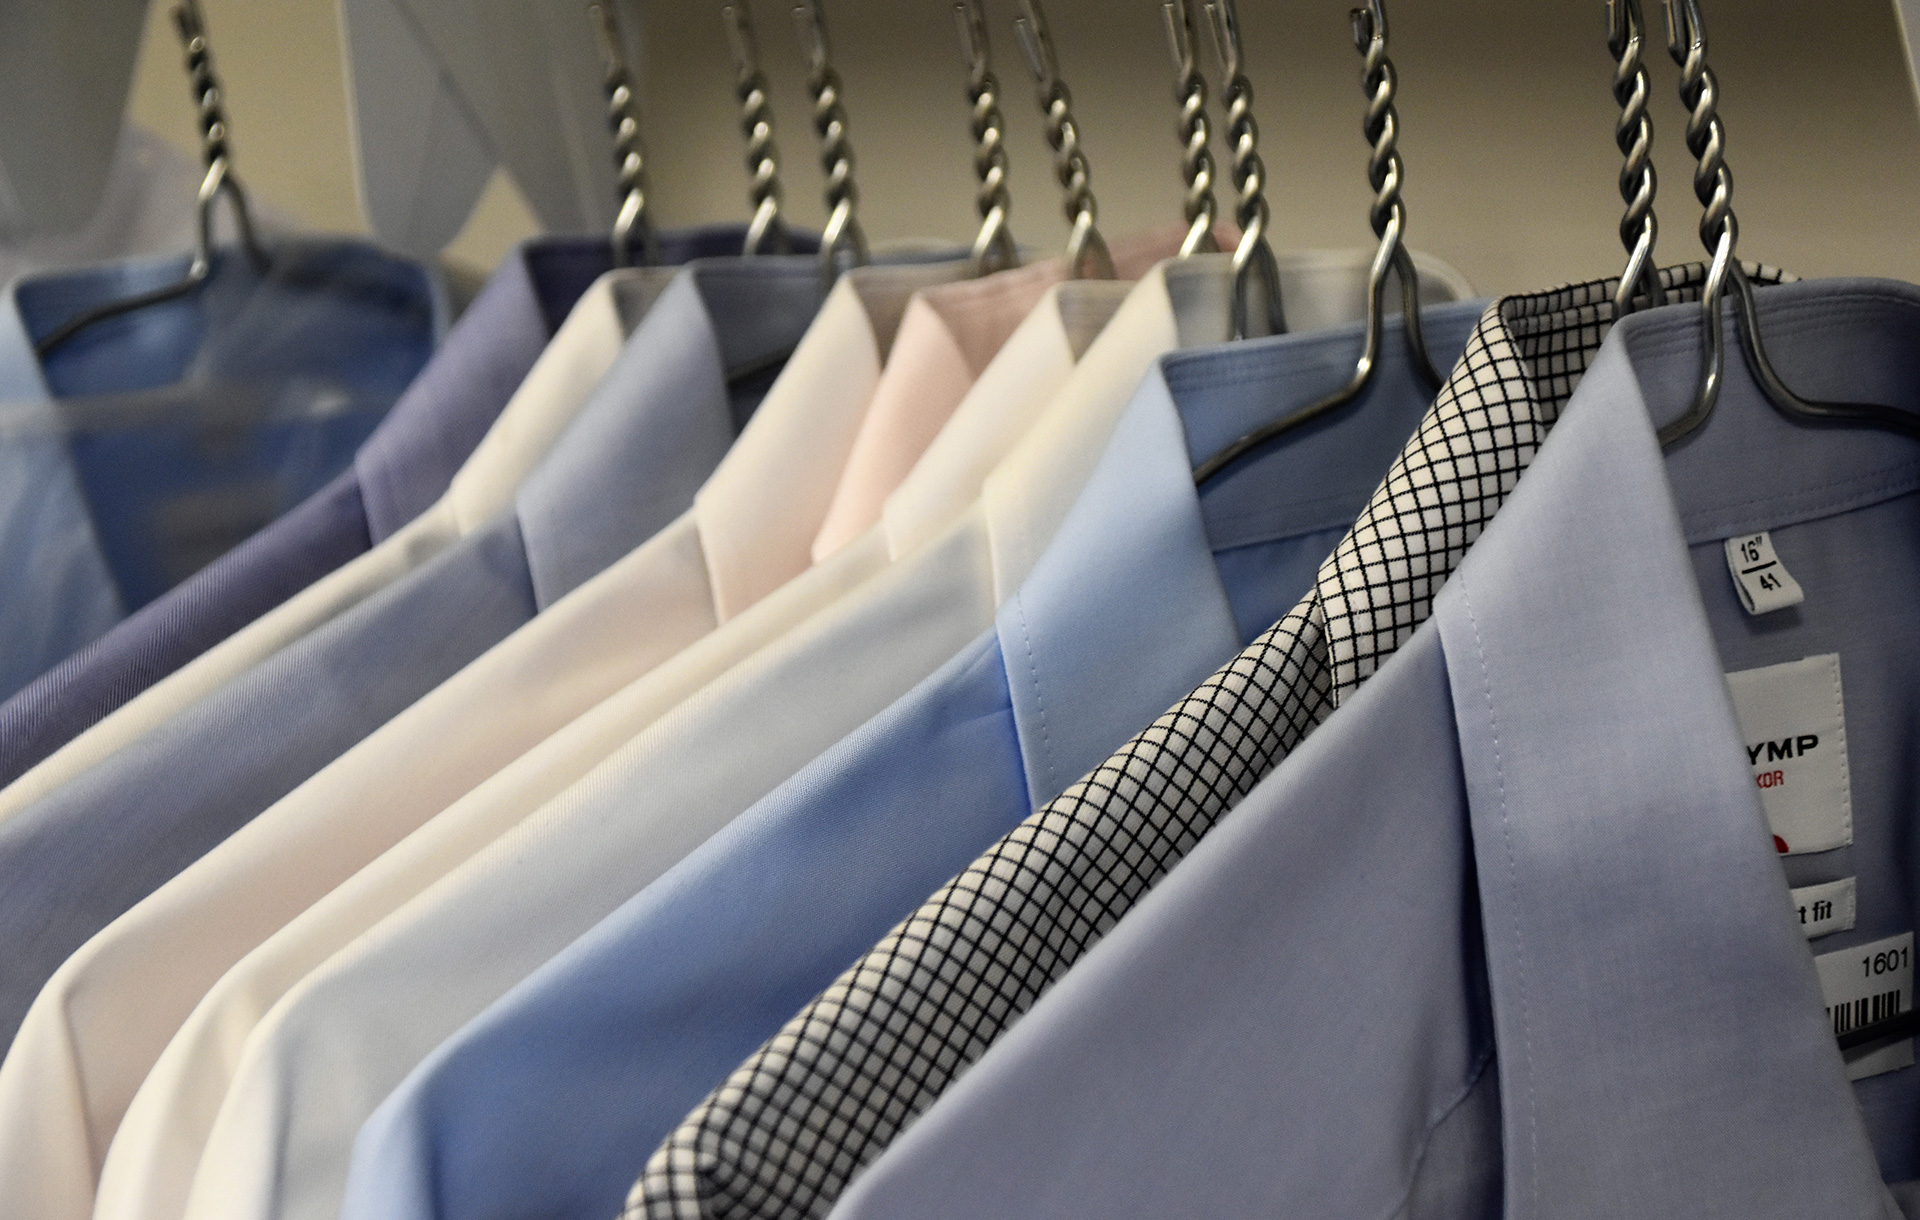 Menswear eCommerce: Finding best fitting suits made easy online